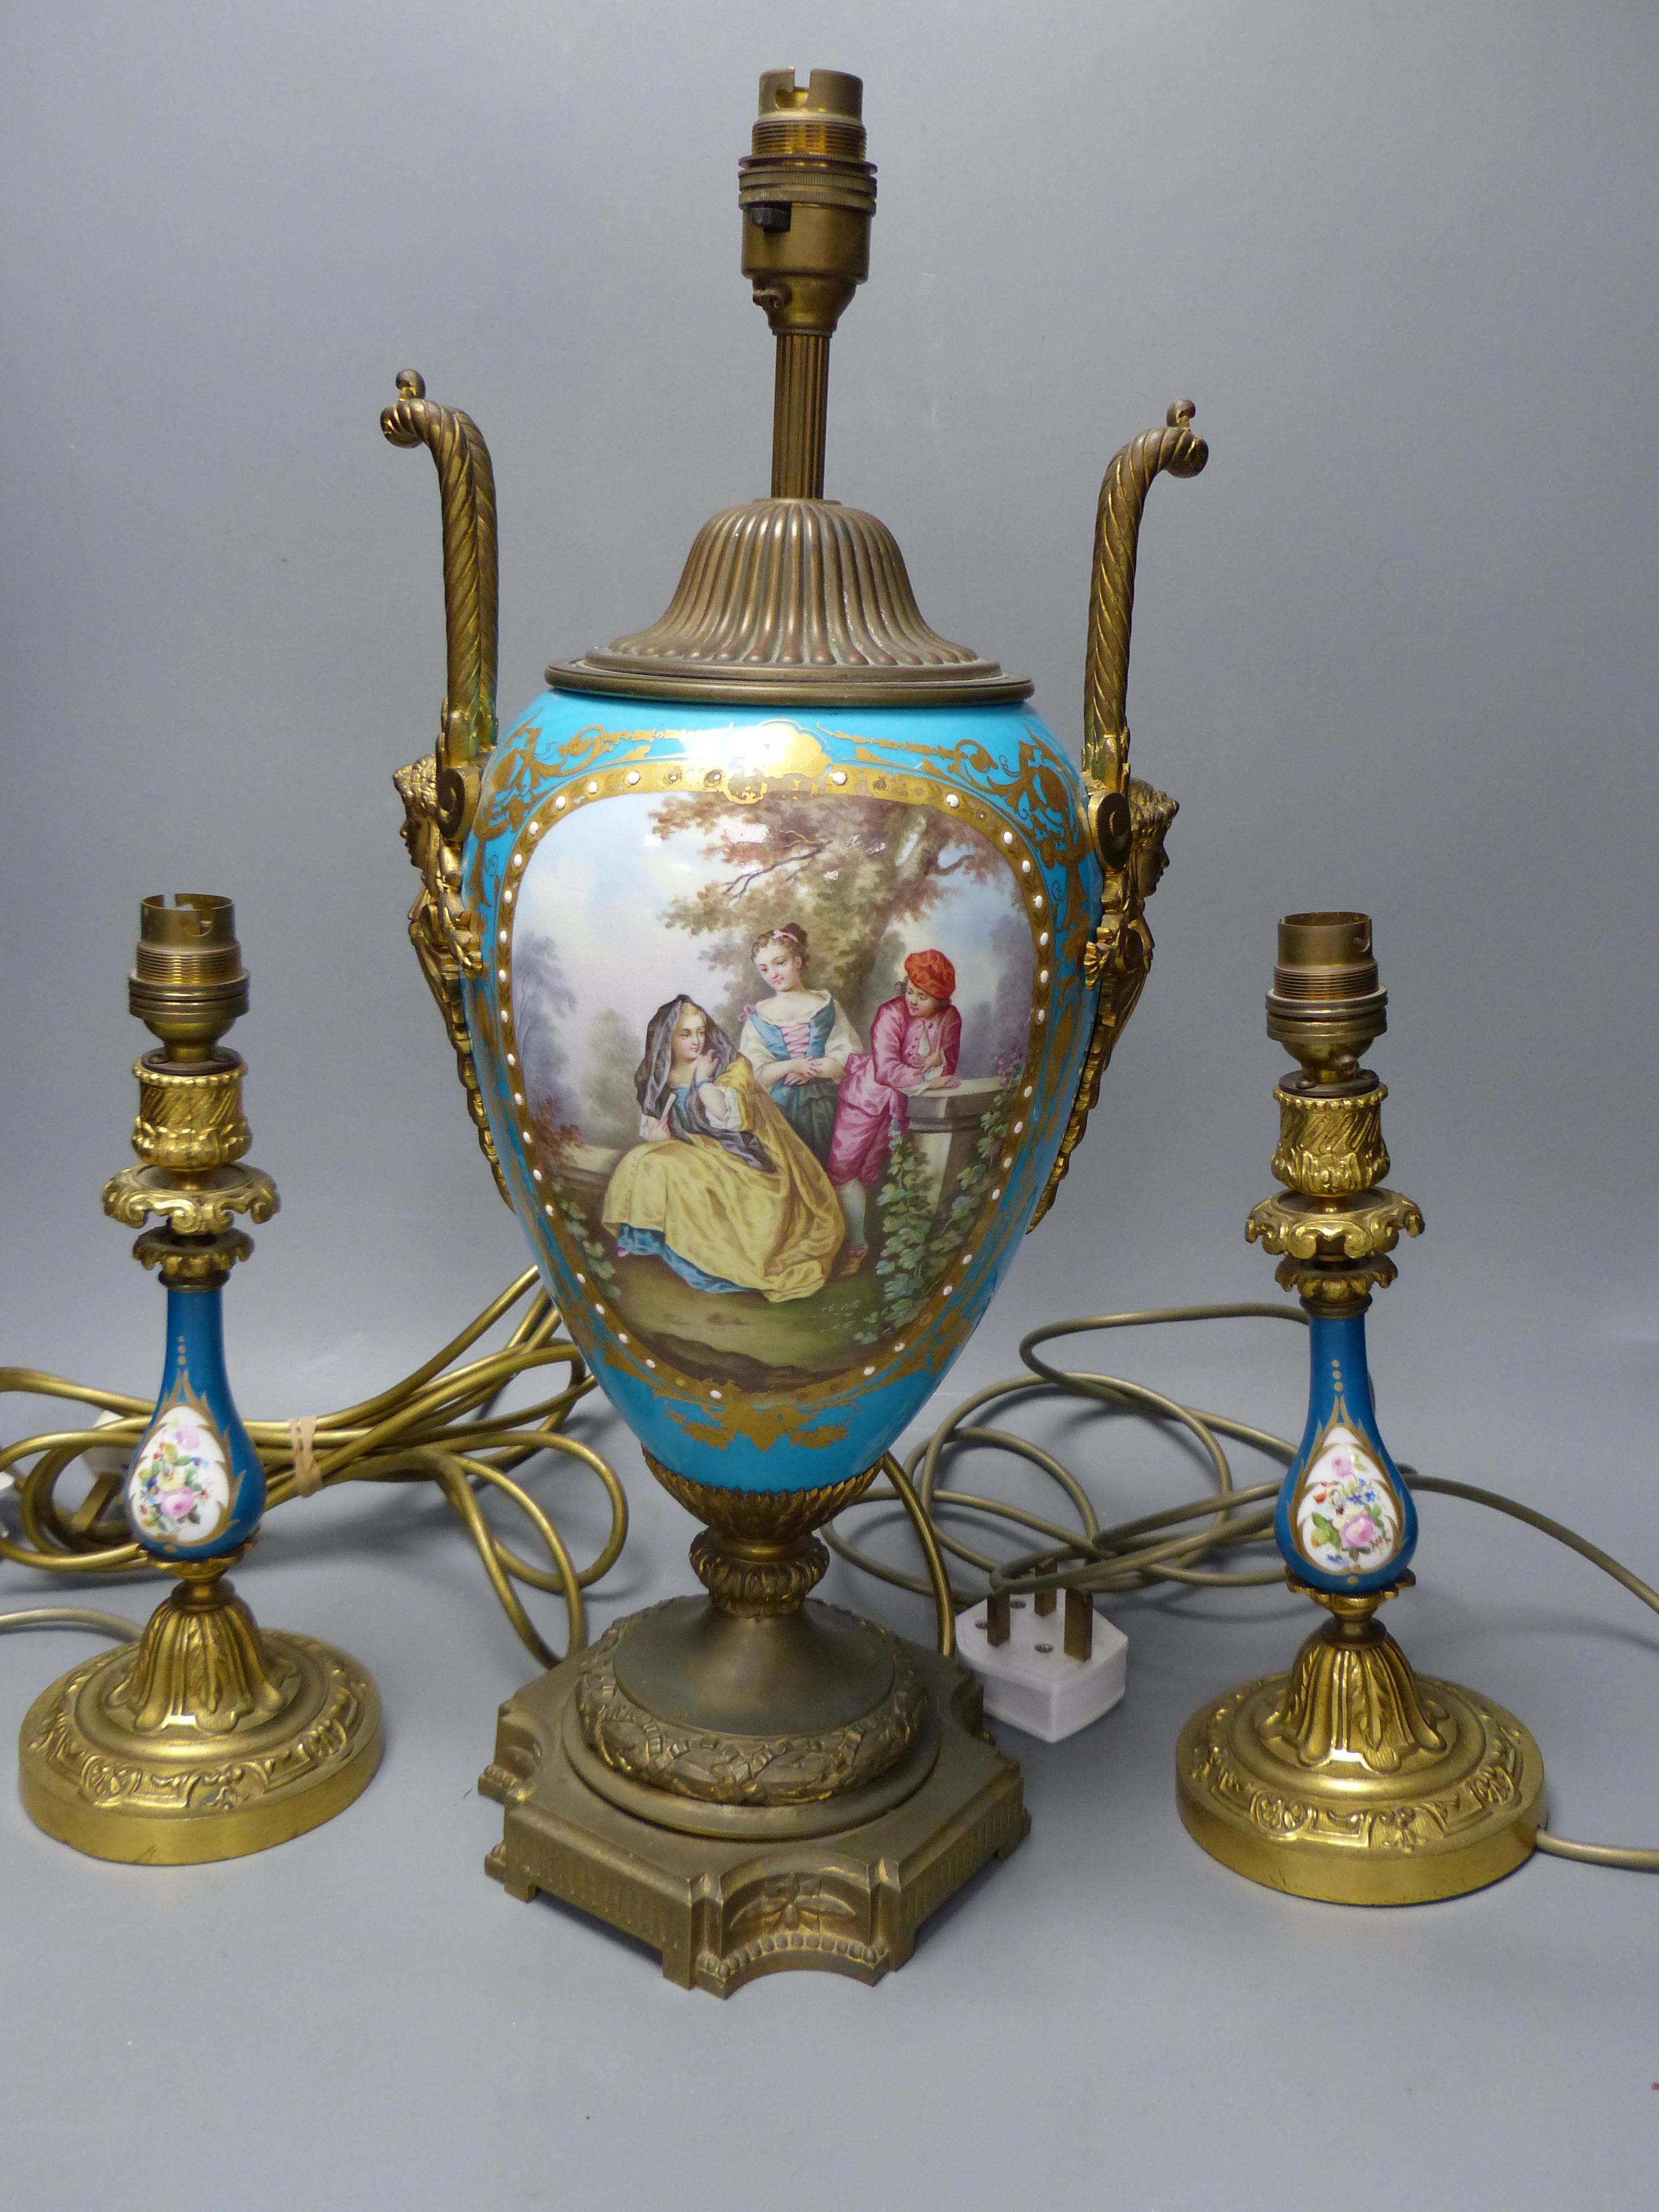 A pair of 19th century Sevres style porcelain and ormolu mounted lamps and a similar larger lamp